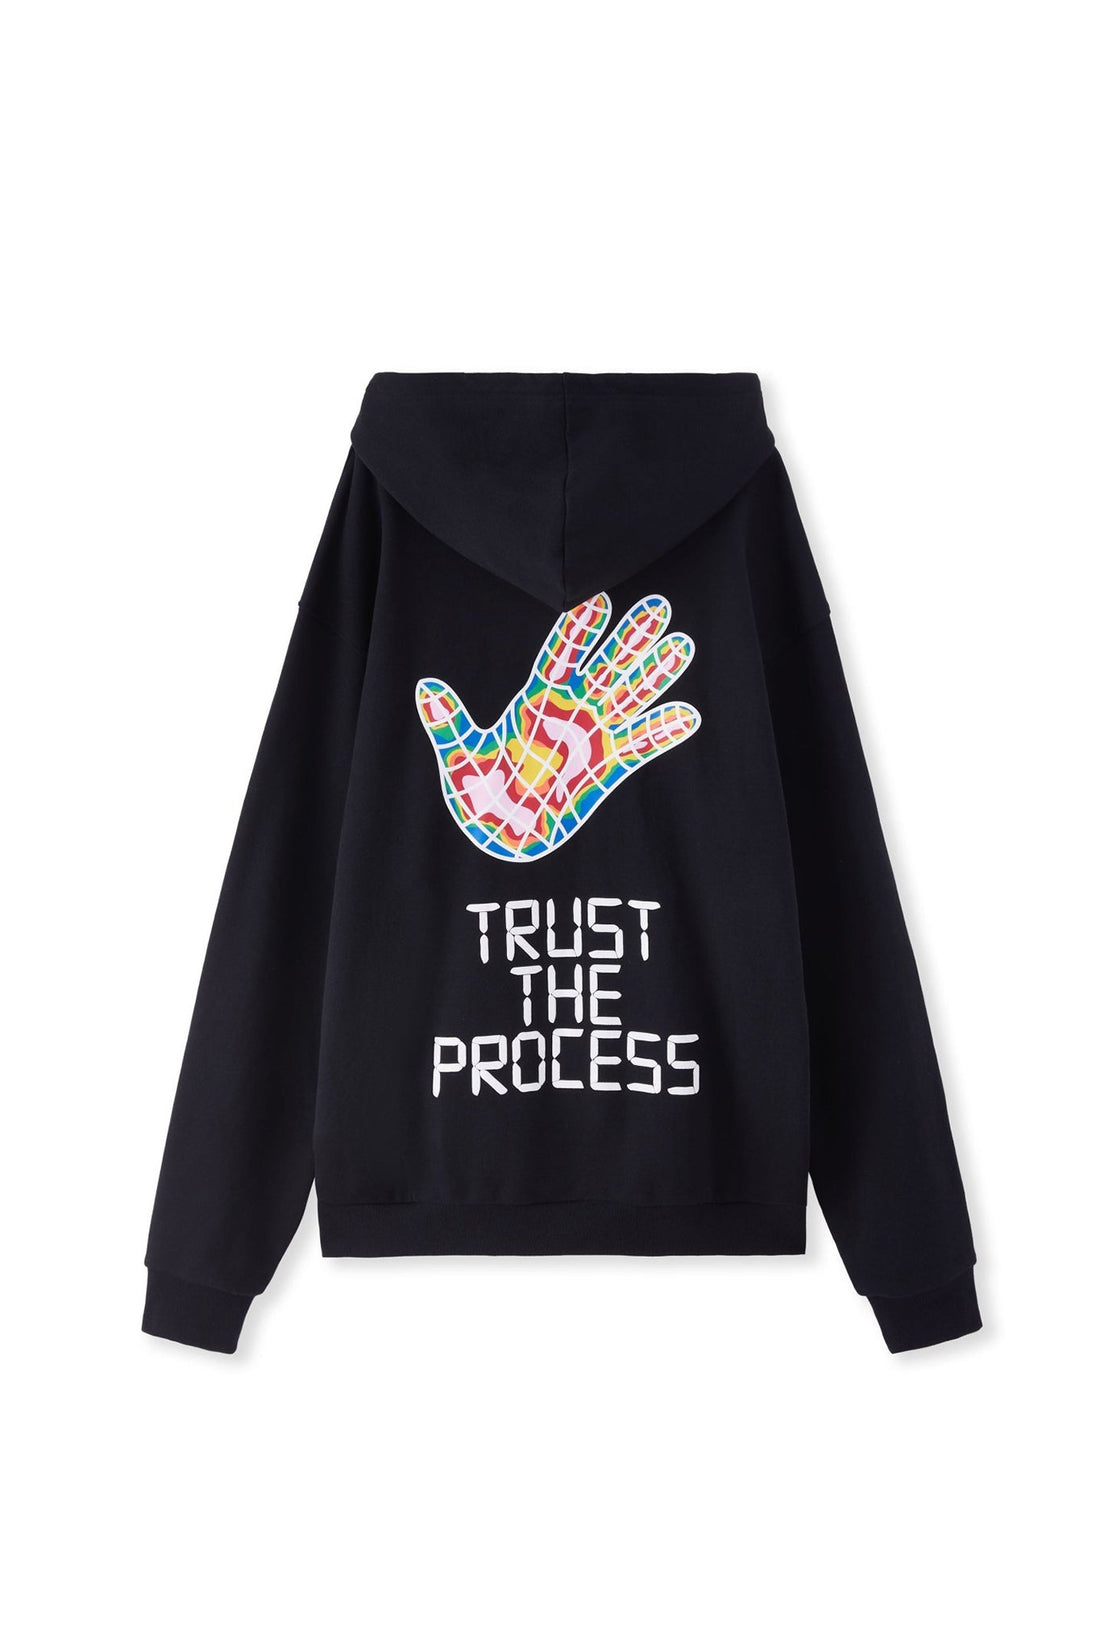 TRUST THE PROCESS HOODIE BLACK Acupuncture